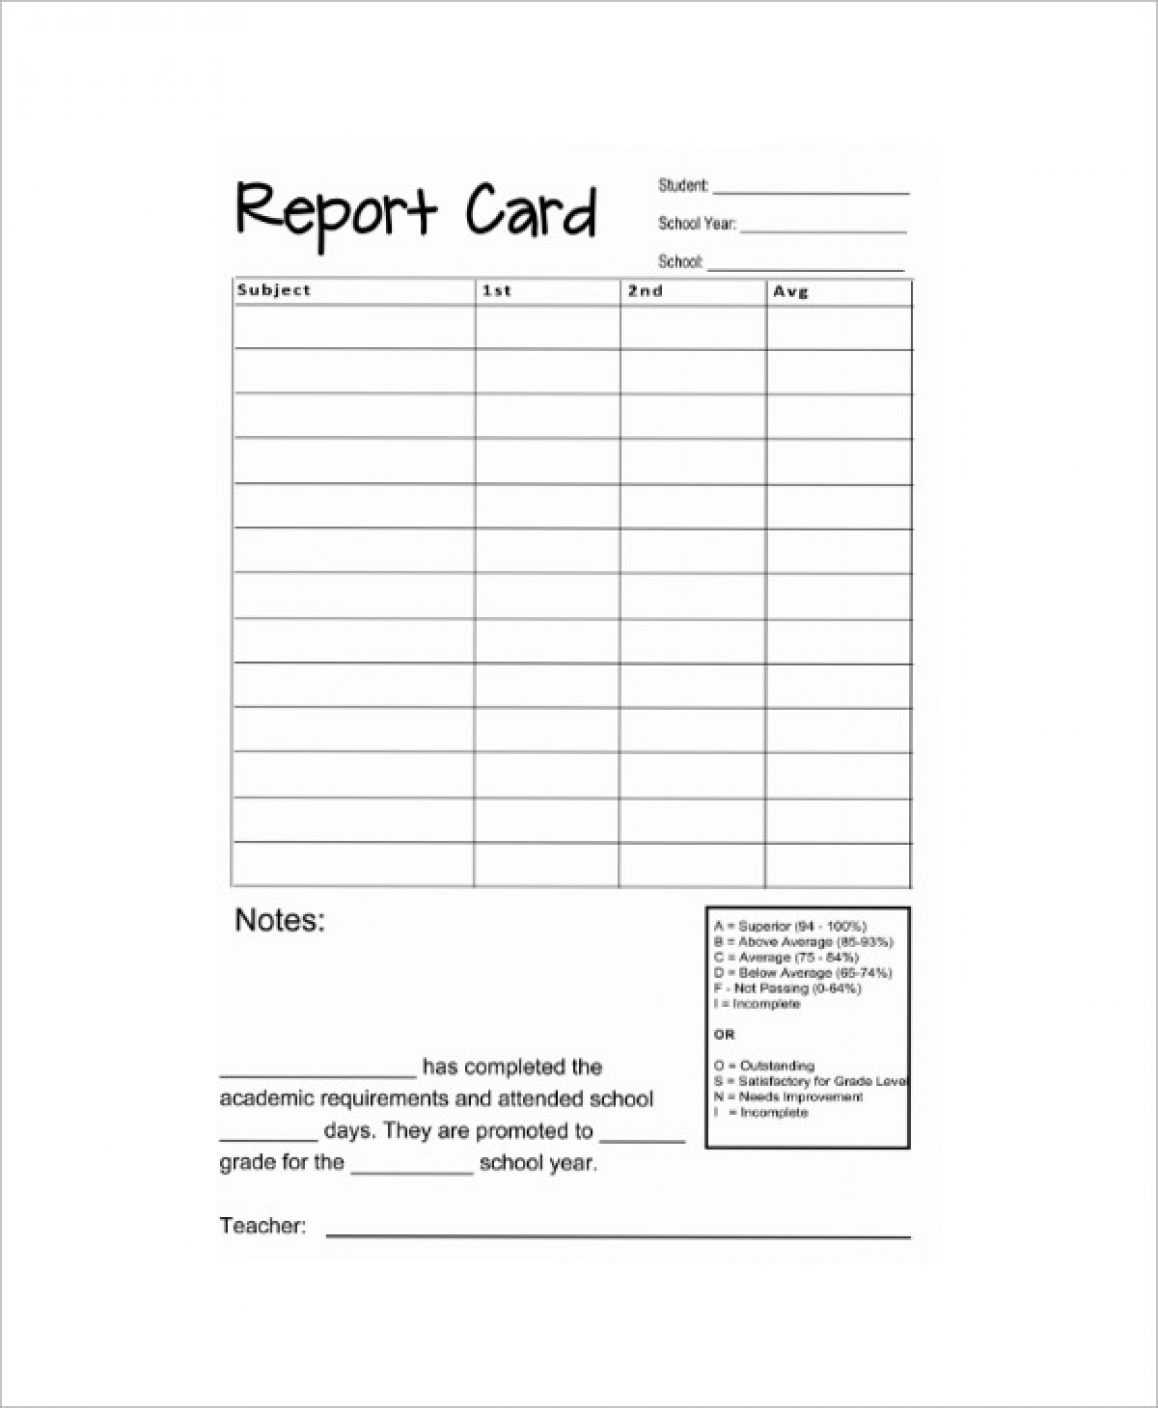 Acceptance Card Template Necessary 10 Sample Report Cards With Regard To Acceptance Card Template